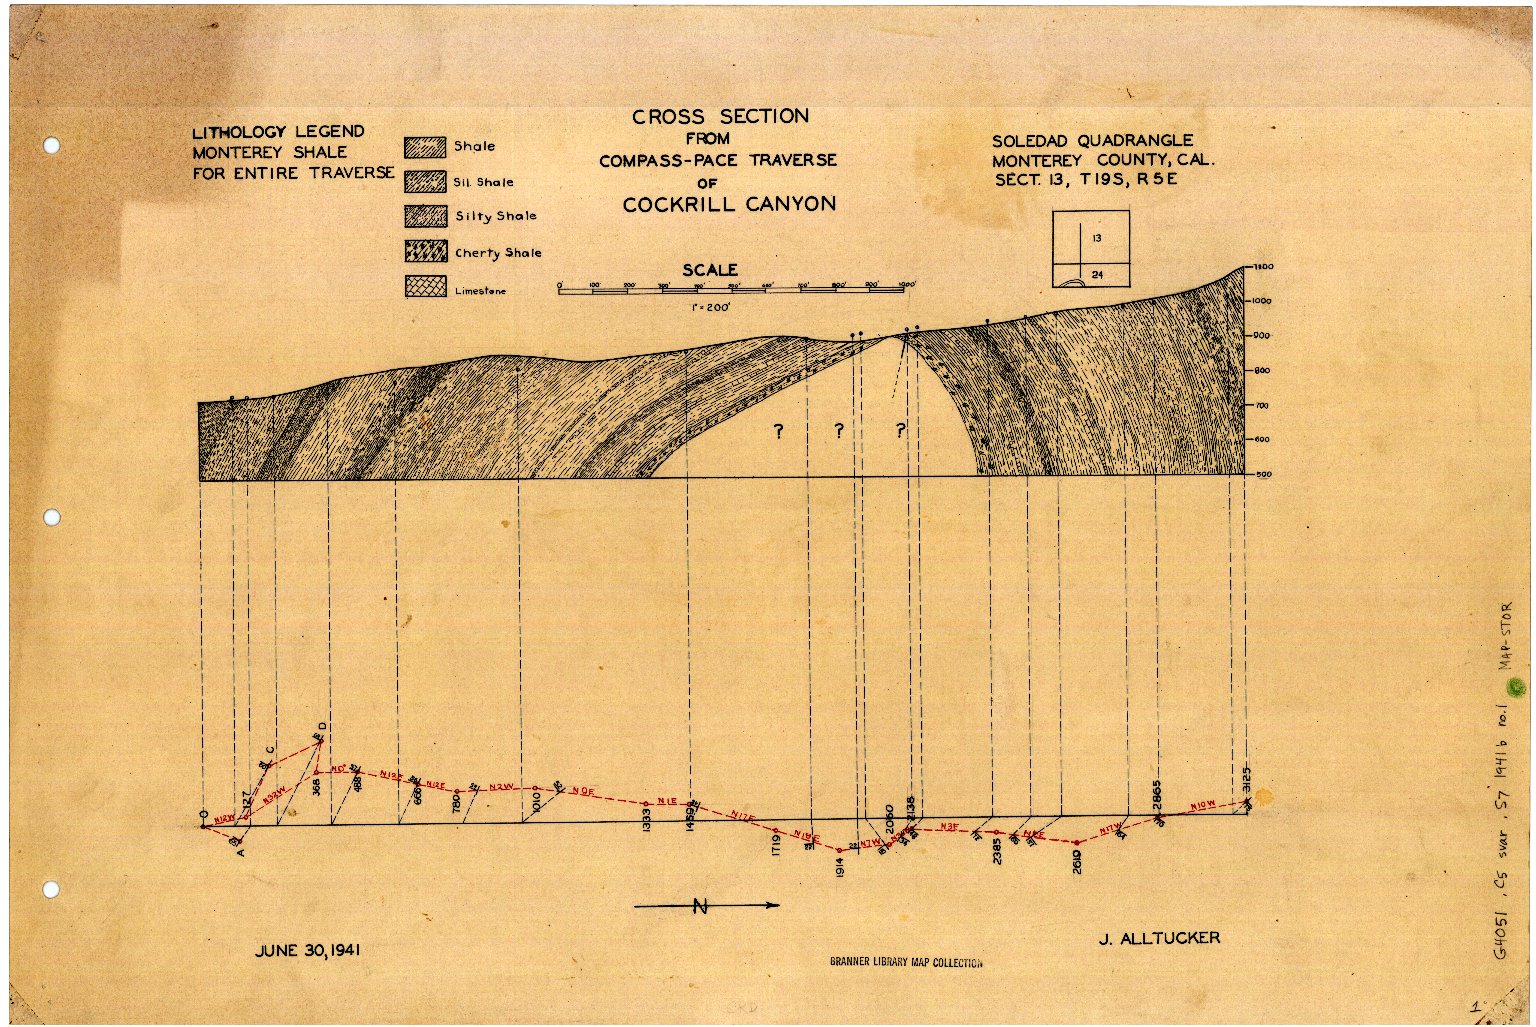 Cross section from compass-pace traverse of Cockrill Canyon, Soledad quadrangle, Monterey County, Cal. ...